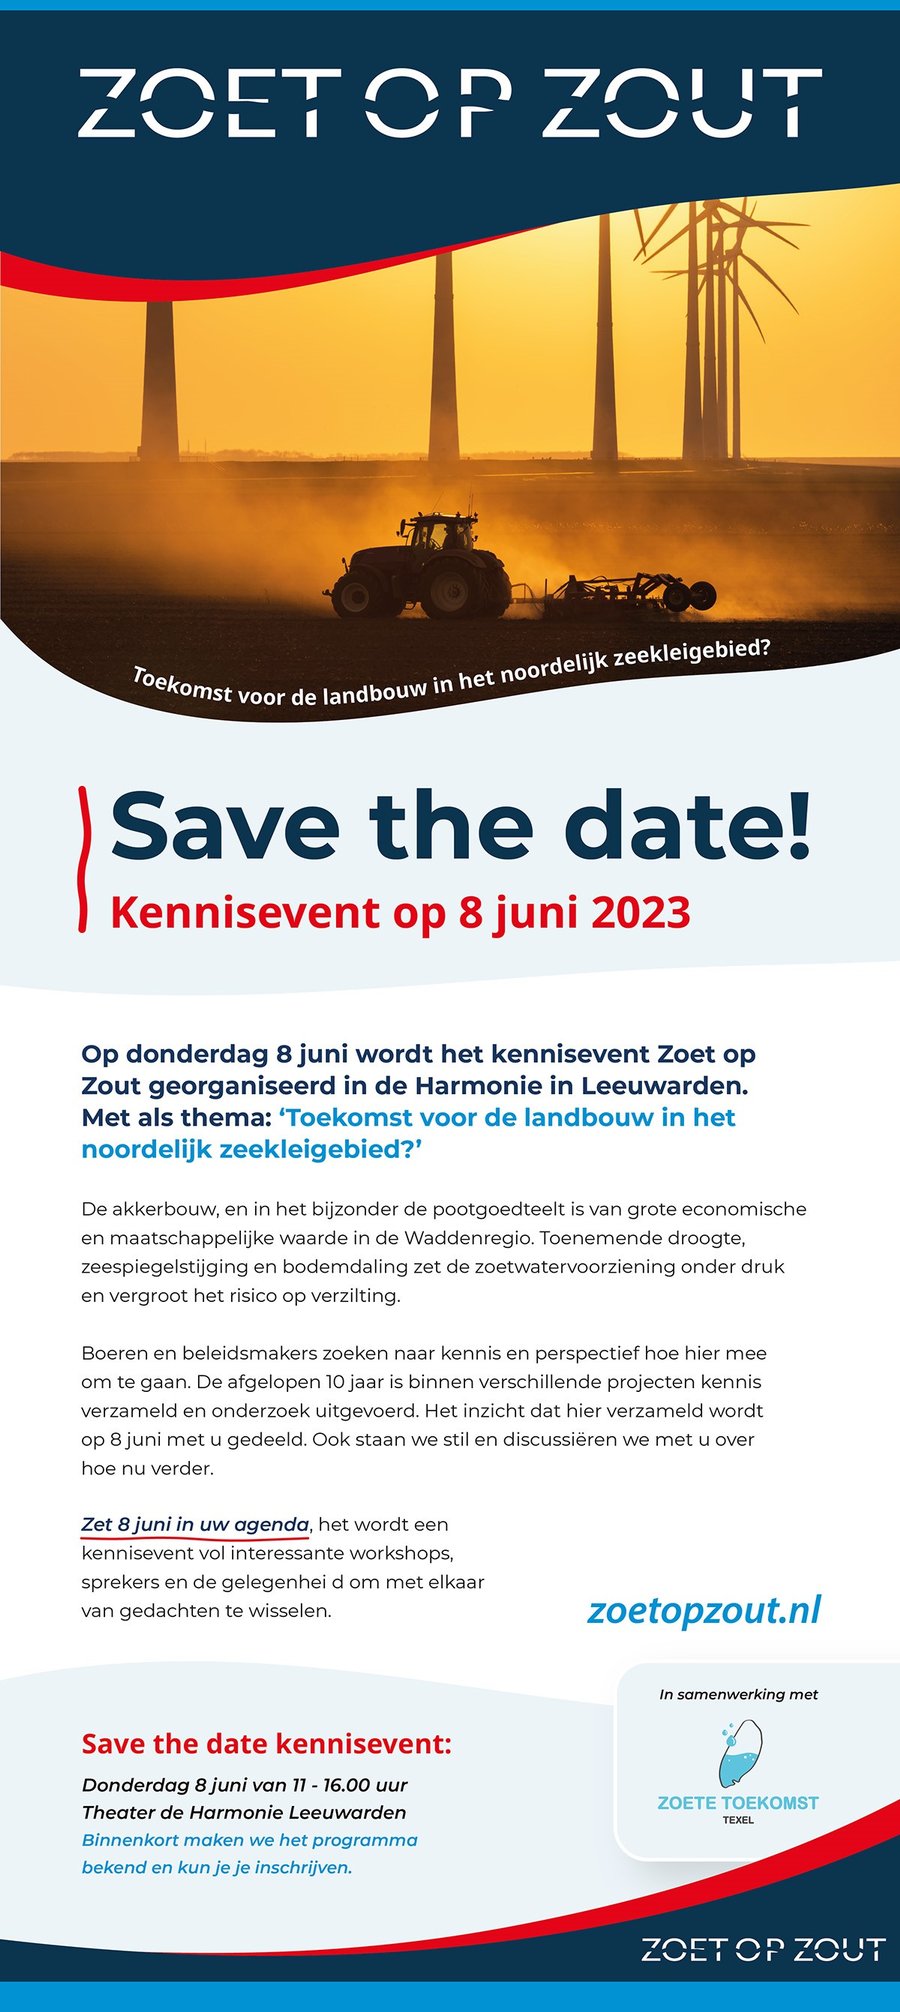 Save the date Kennisevent Zoet op Zout 8 juni 2023 -  Acacia Water